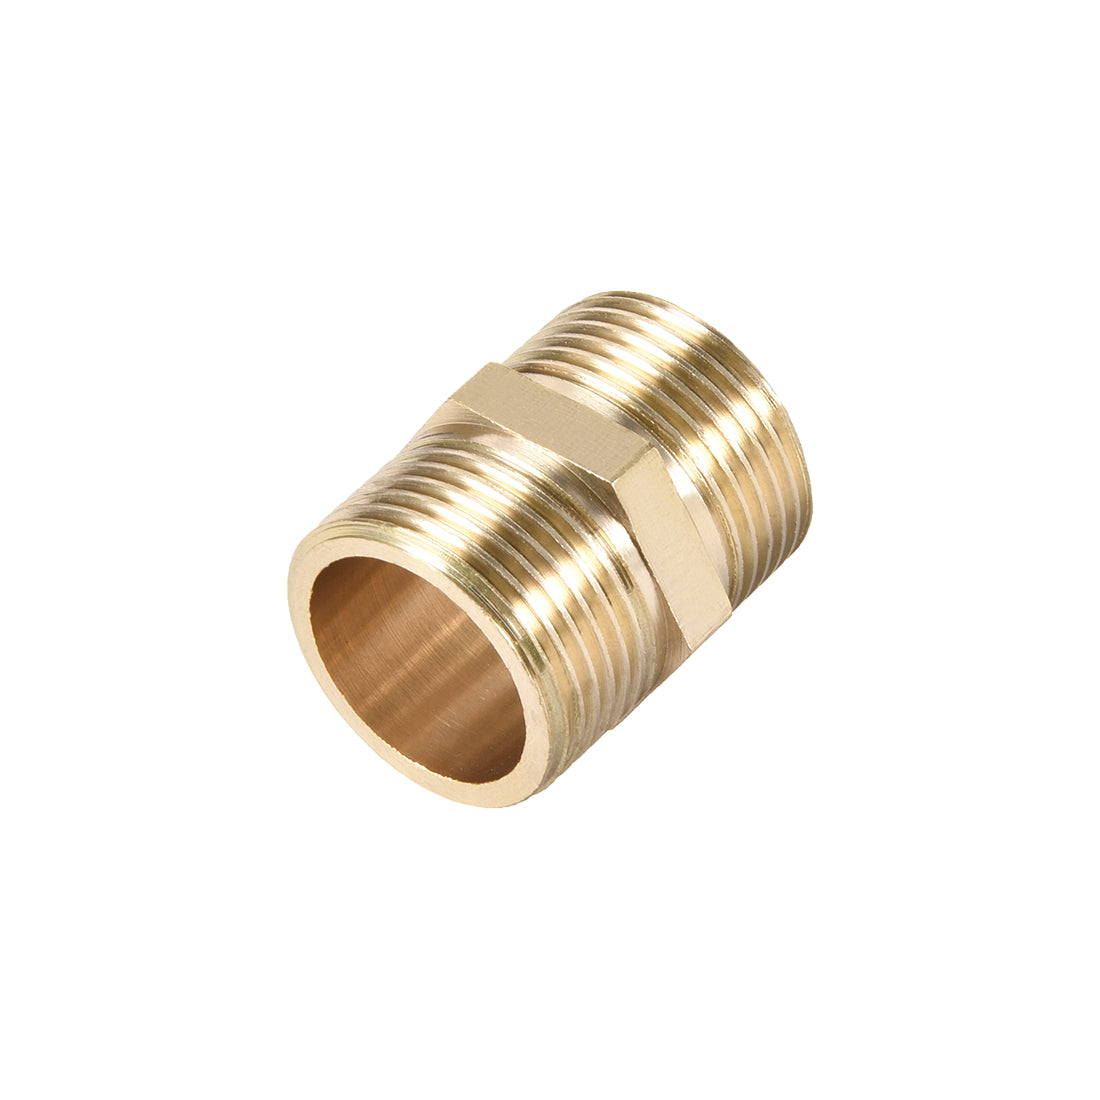 uxcell Uxcell Brass Pipe Fitting Connector Straight Hex Nipple Coupler 3/4 x 3/4 G Male Thread Hose Fittings Gold Tone